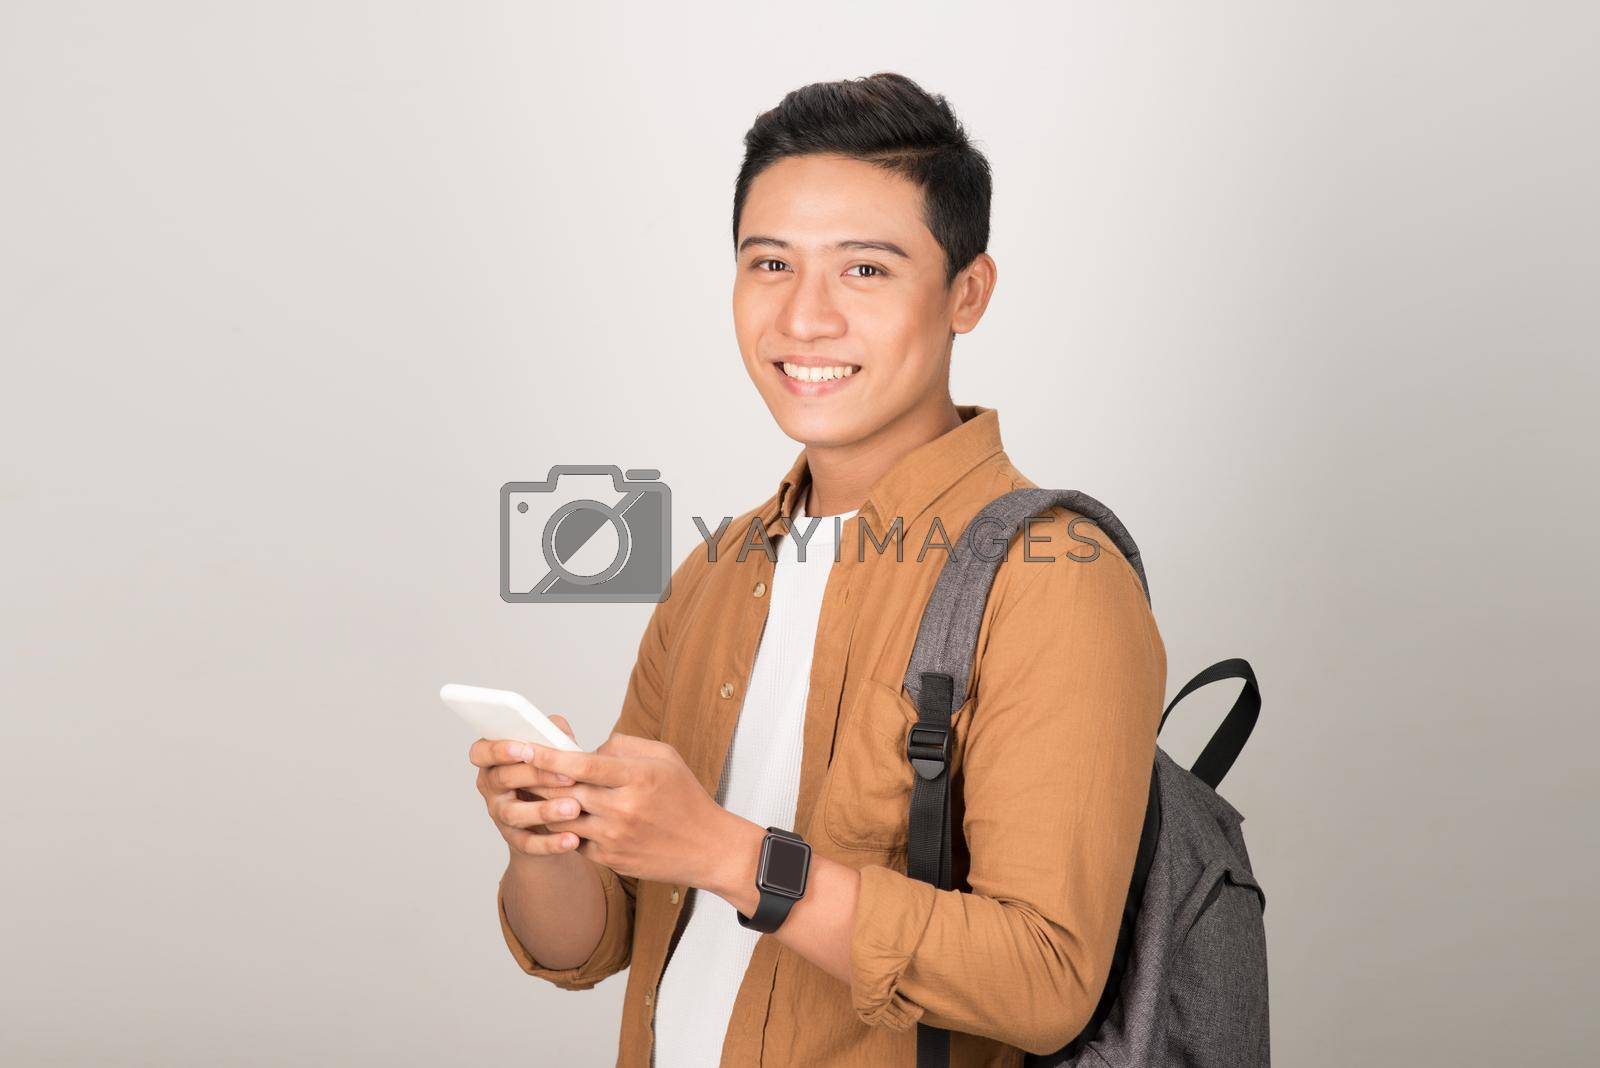 Royalty free image of Young Asian Student Texting on Cell Phone Isolated on White Background by makidotvn